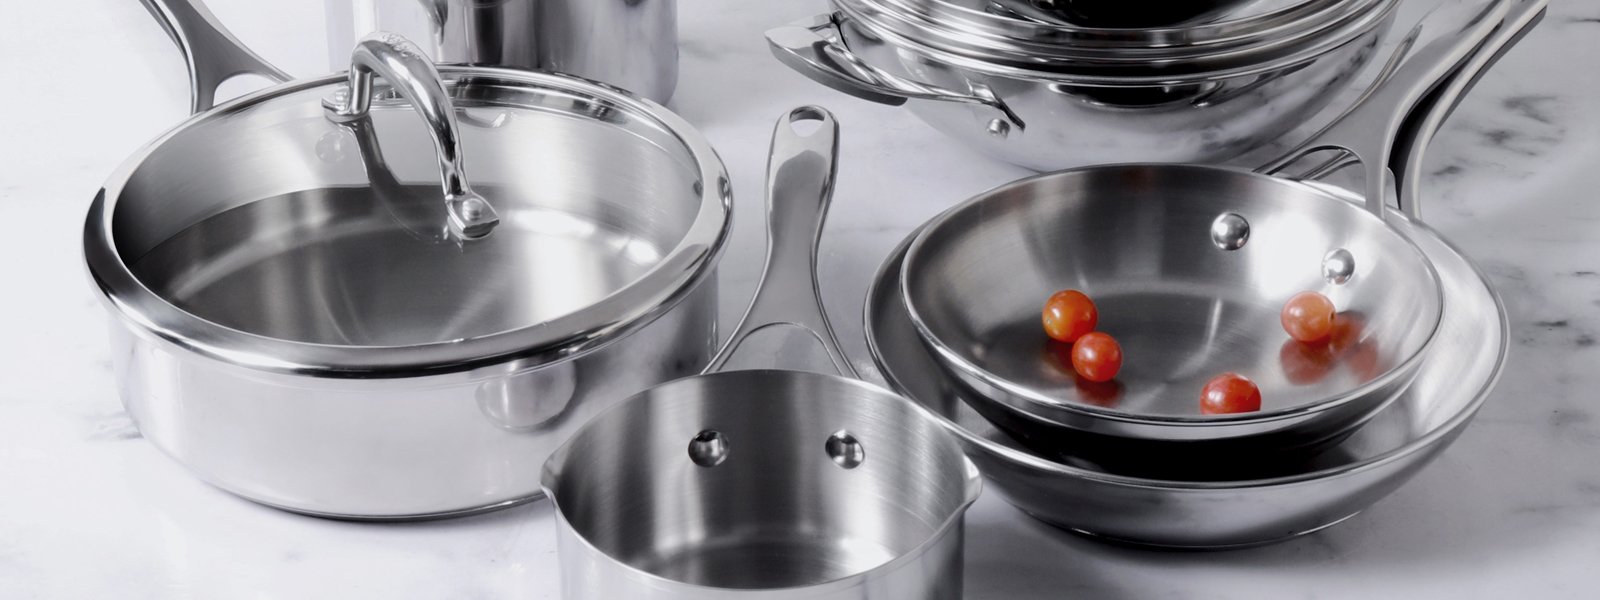 Stainless Steel, Ceramic Cookware Vs Stainless Steel